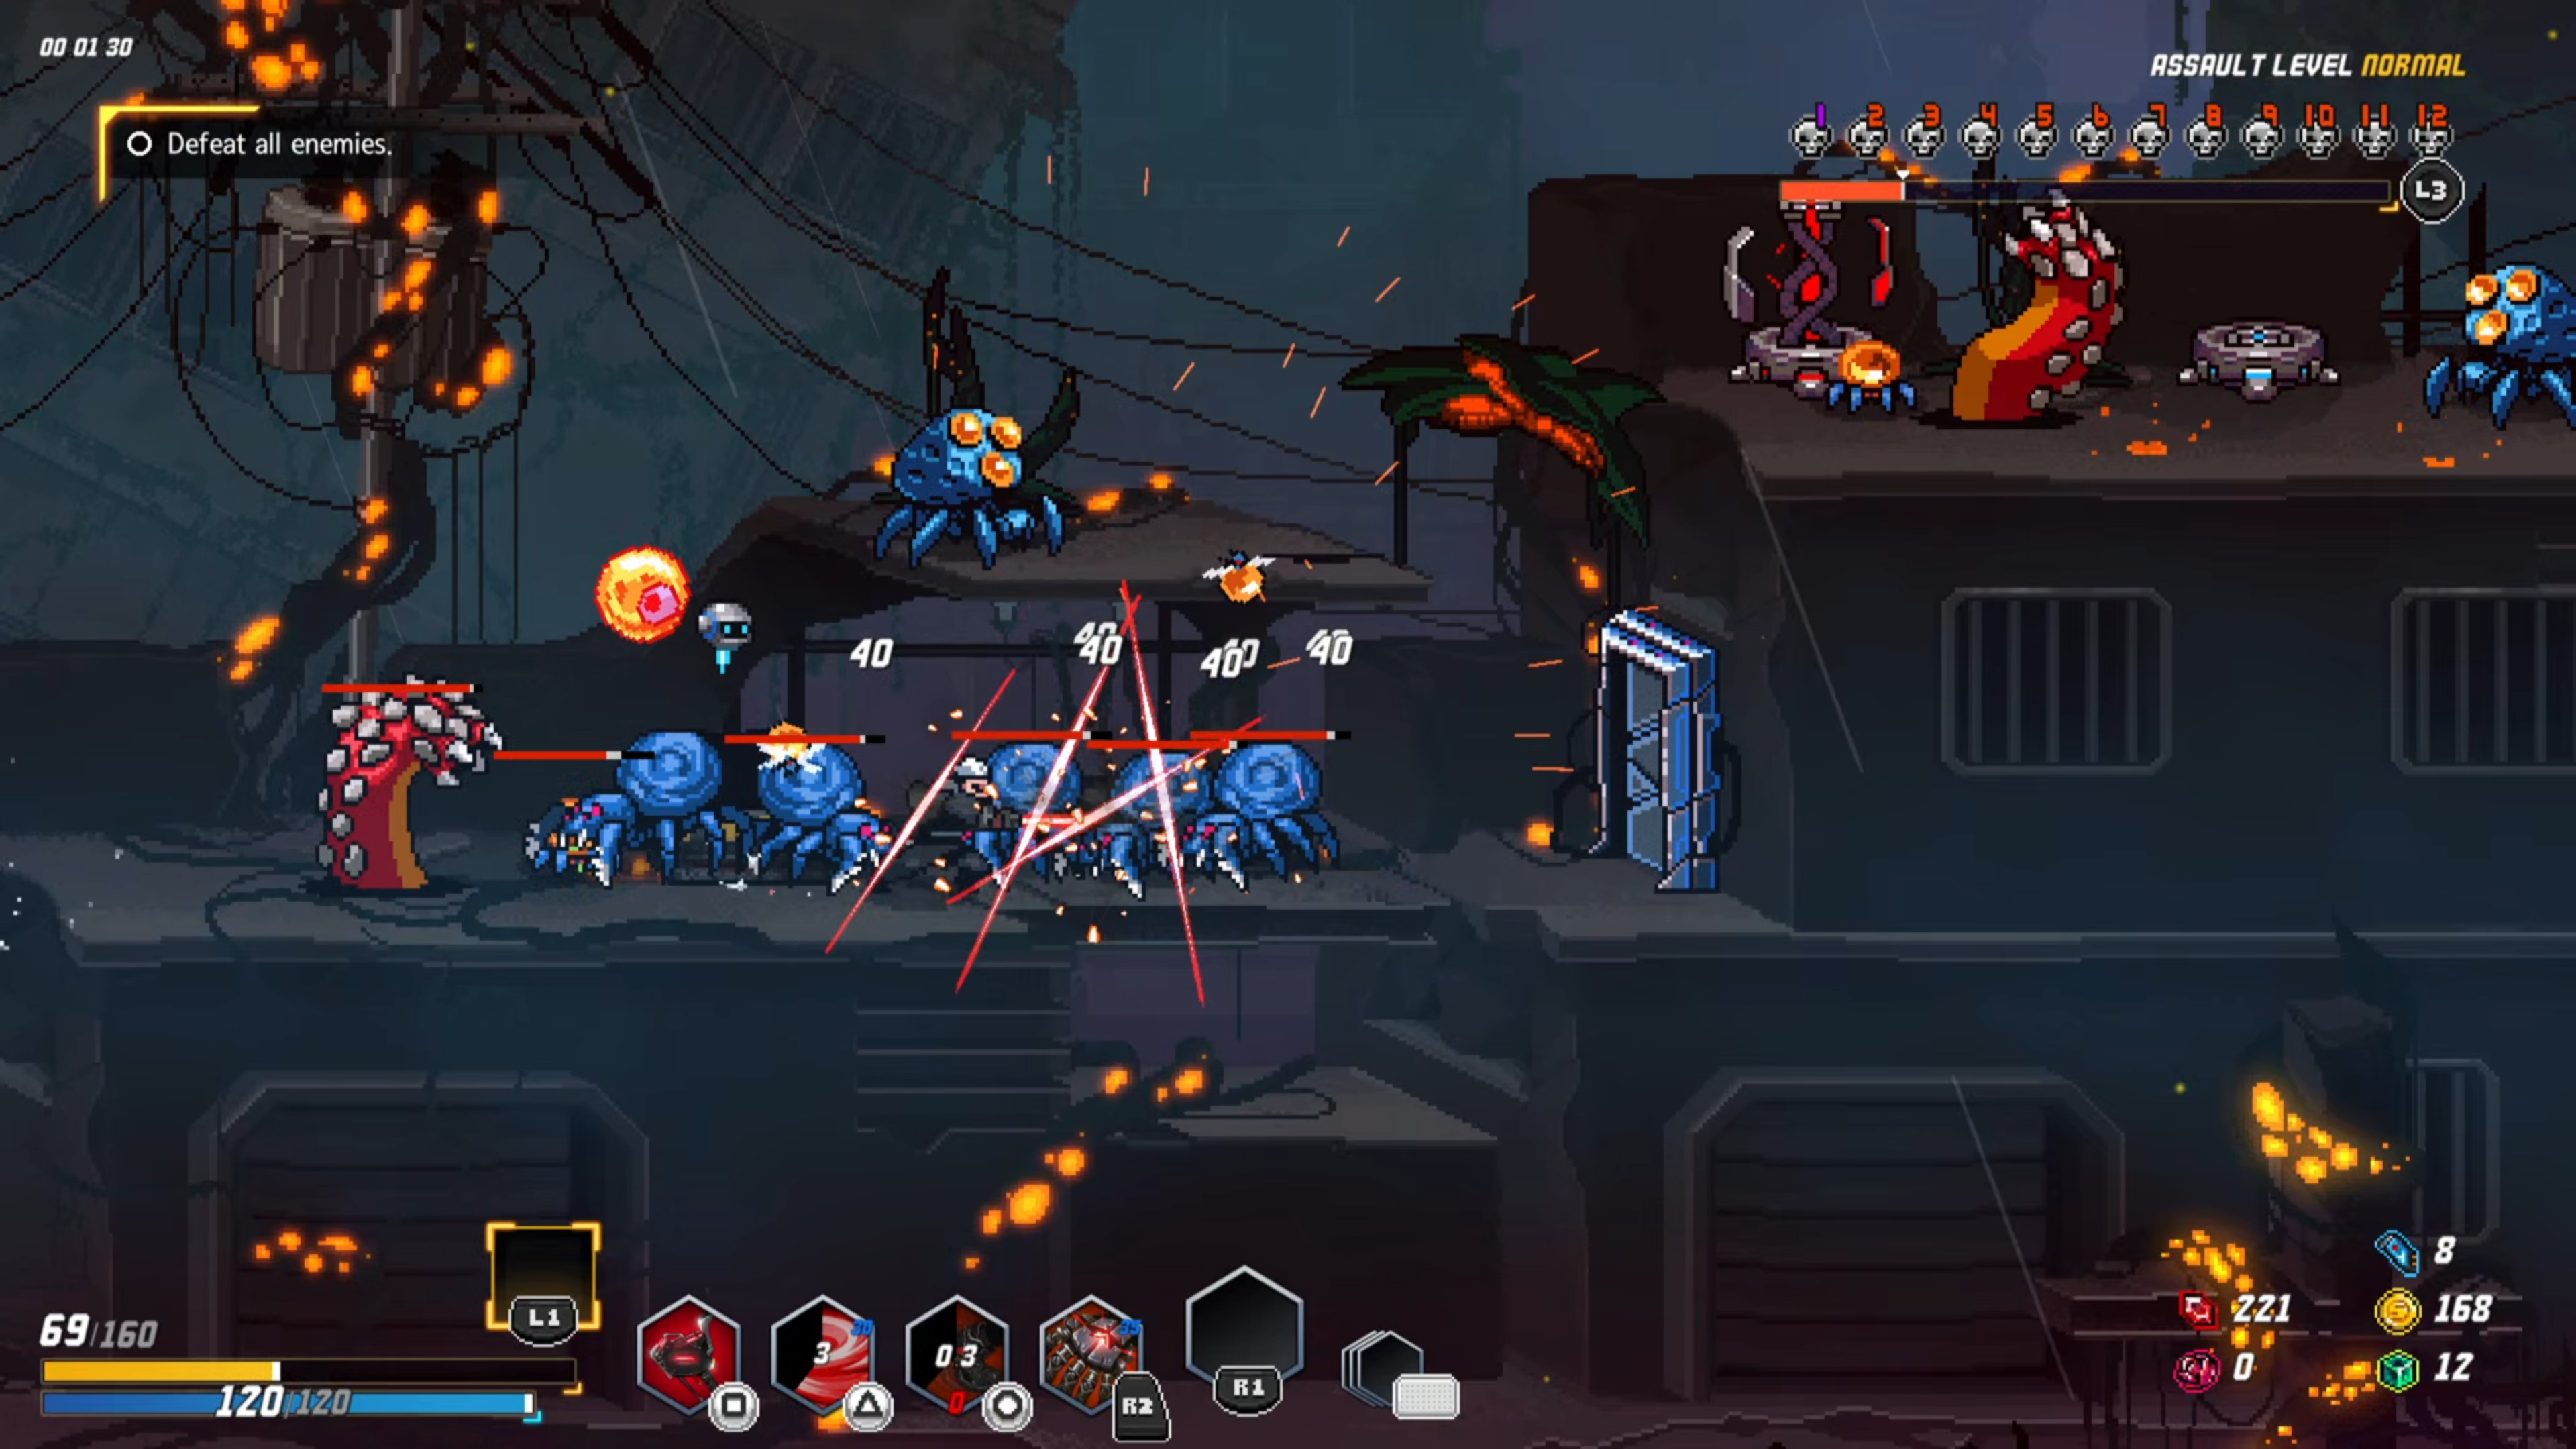 a 2d pixel art character slices through some blue crab like creatures as they attack him. The environment is dark and dreary with orange sparks spitting form the melee